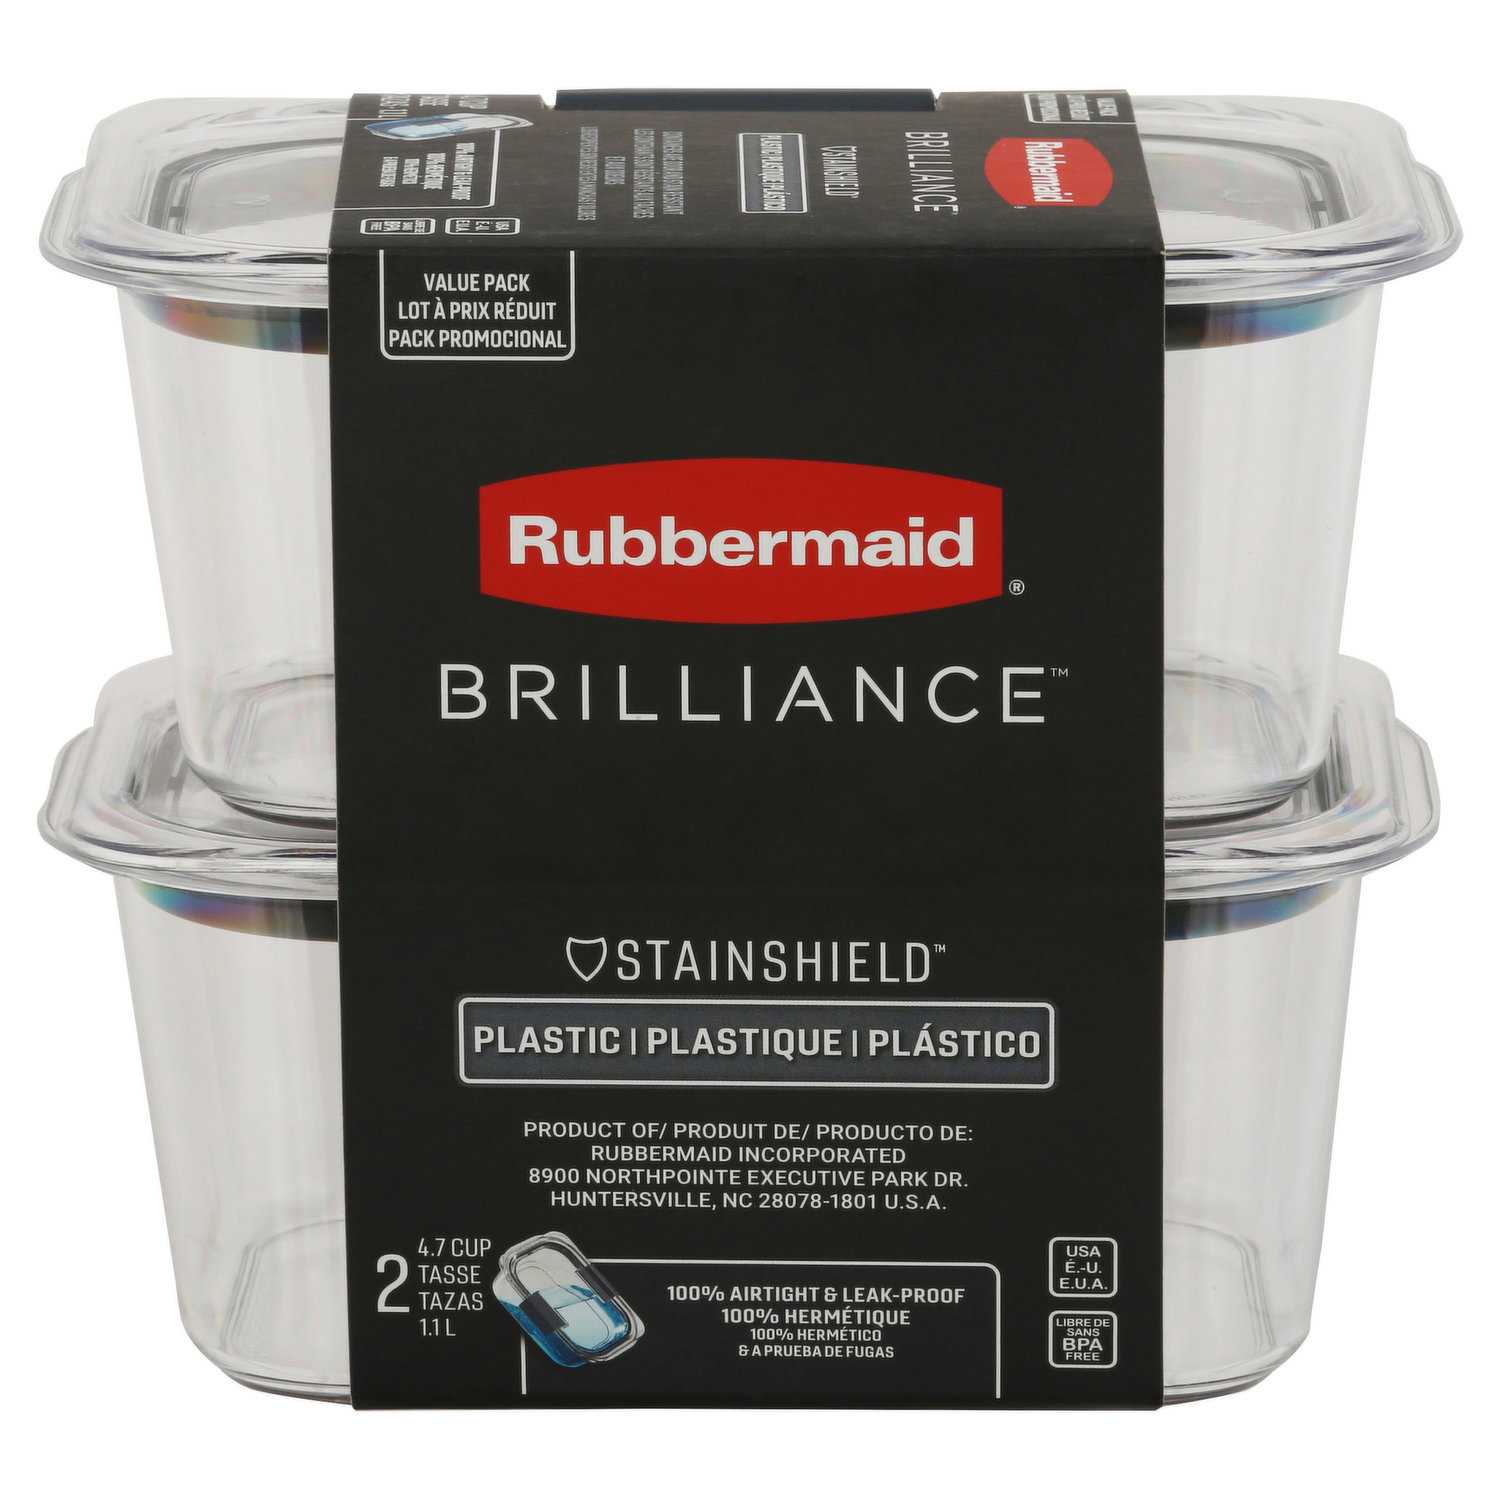 Rubbermaid 4.7 Cup Brilliance Salad Lunch Food Storage Container